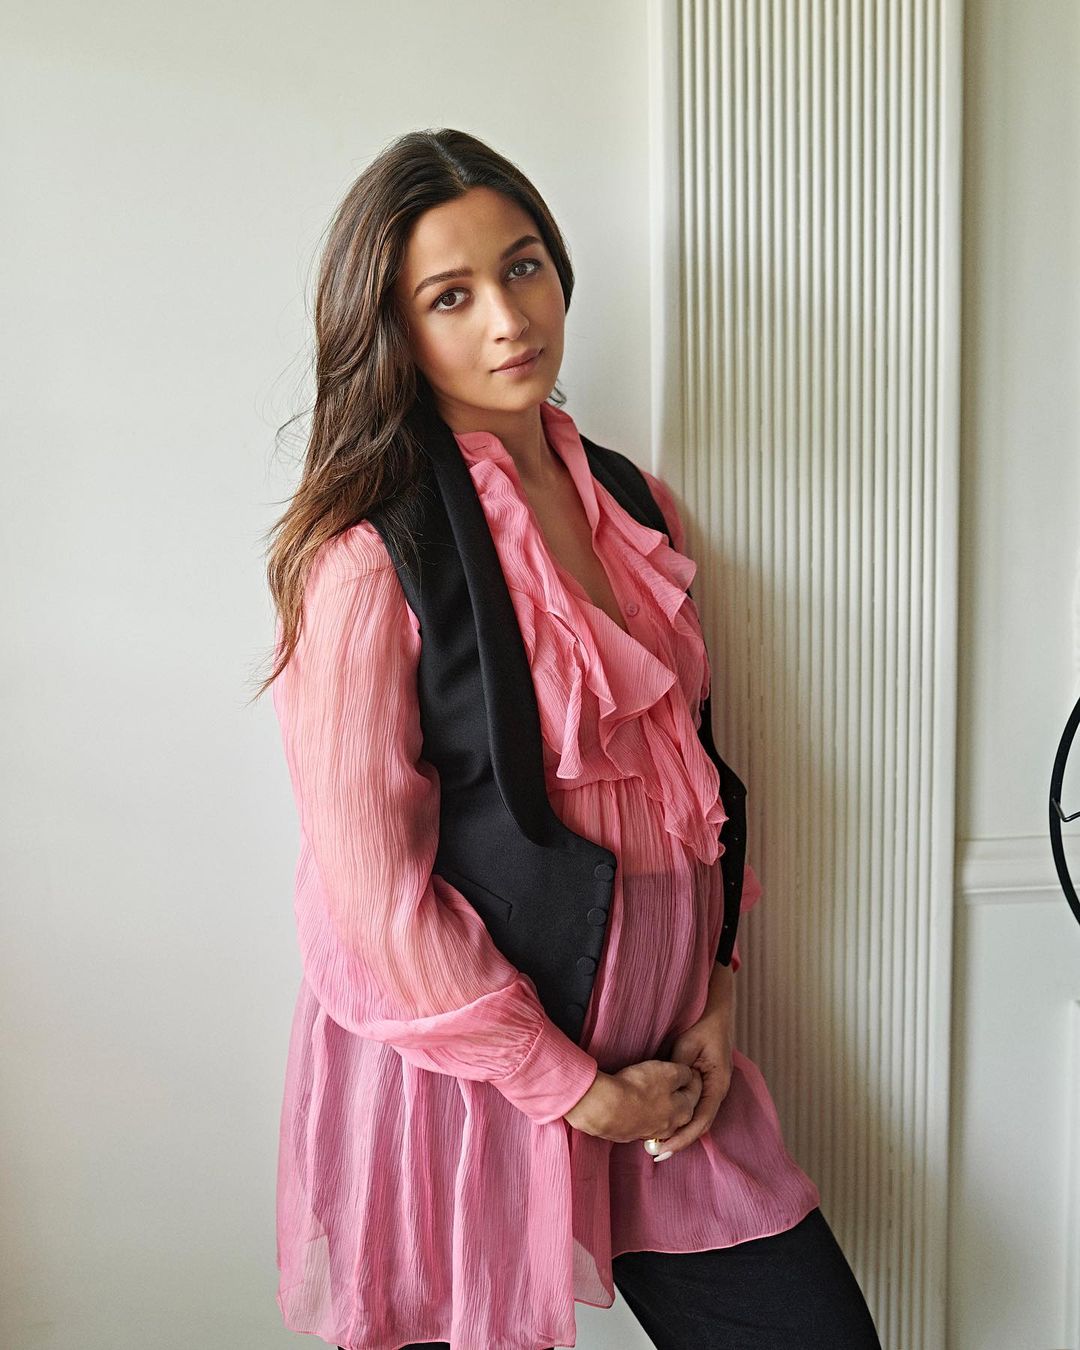 Alia Bhatt Displays Her Baby Bump in a Pink Ruffle Gucci Dress and Promoting Brahmastra